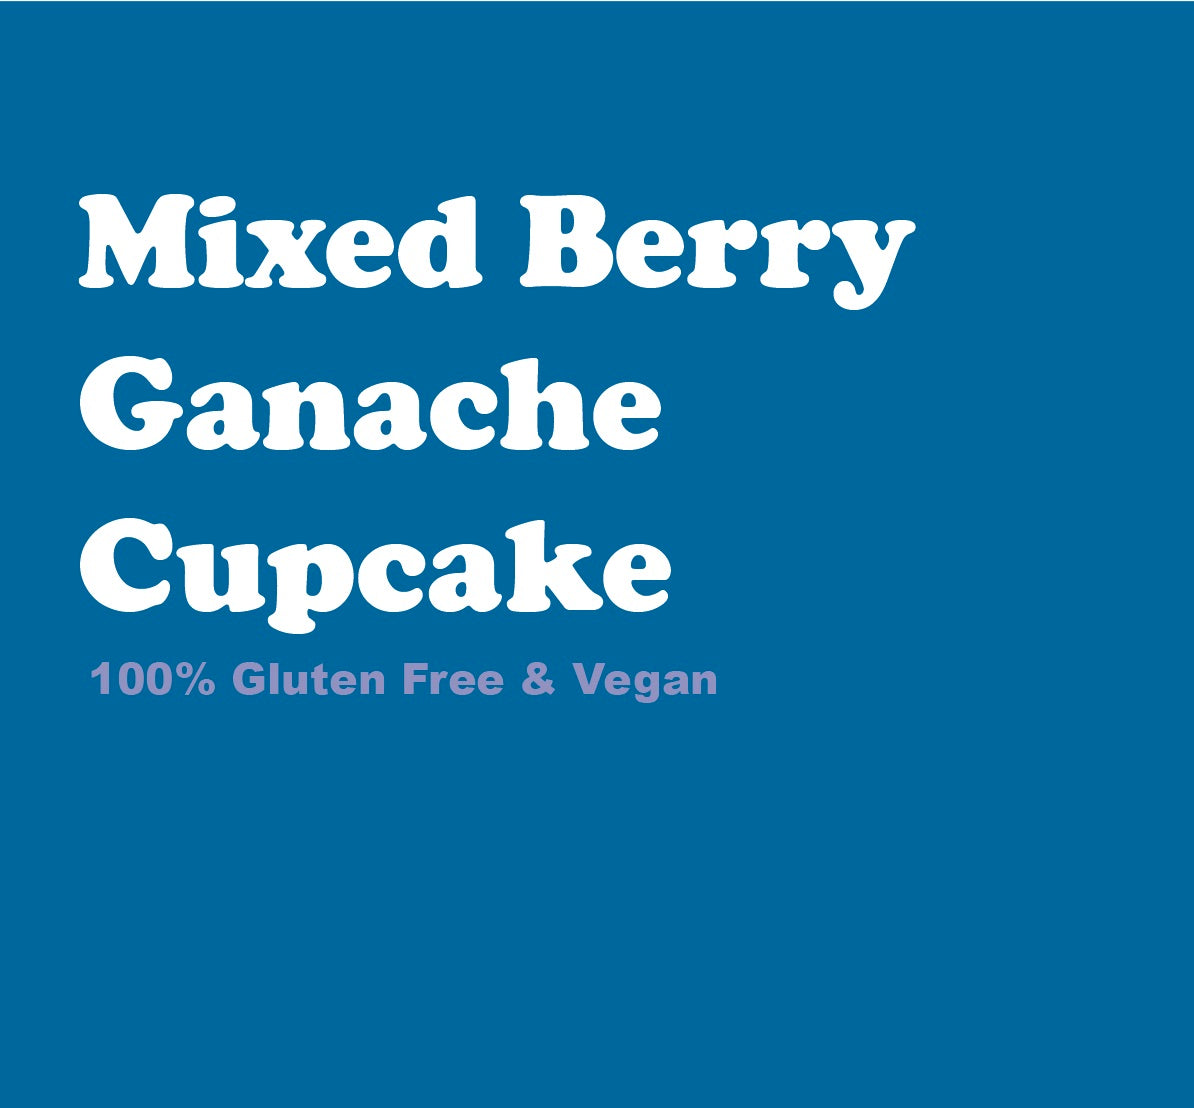 Mixed Berry Ganache Cupcakes (4 PACK)